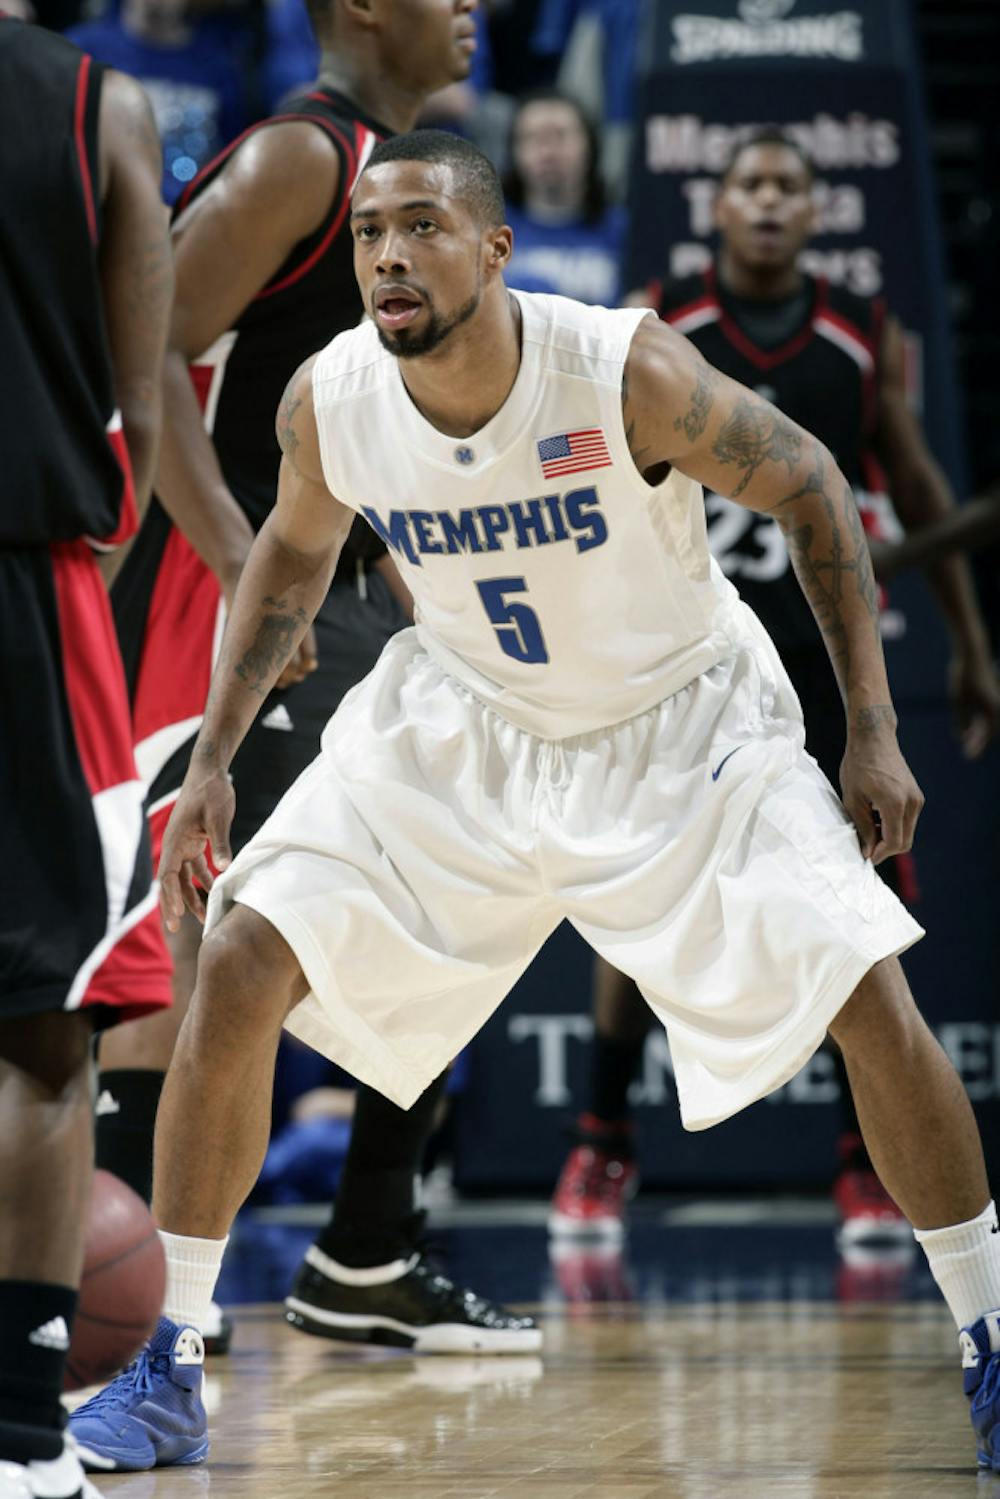 <p>Former Tigers guard Antonio Anderson gets into his defensive stance. Anderson famously hit game-winning free-throws to help the Tigers advance past Texas A&amp;M in the 2007 NCAA Tournament.</p>